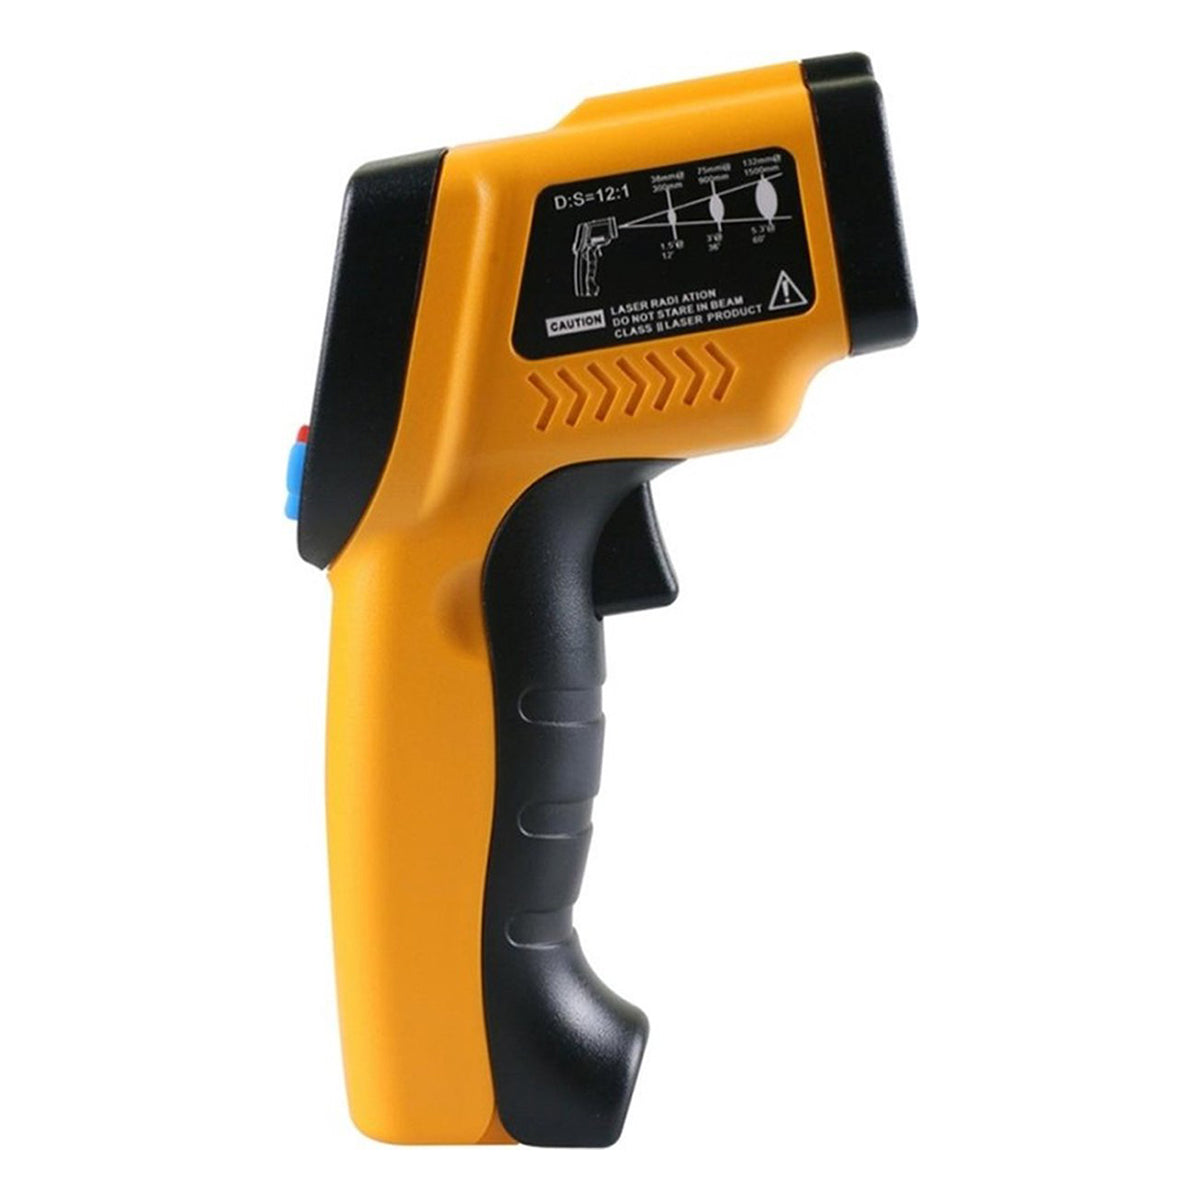 <tc>Ariko</tc>  Infrared Laser Thermometer - Surface thermometer - Non-contact - Laser pointer - Blacklight LCD Screen - Incl Batteries - Orange - up to 550º